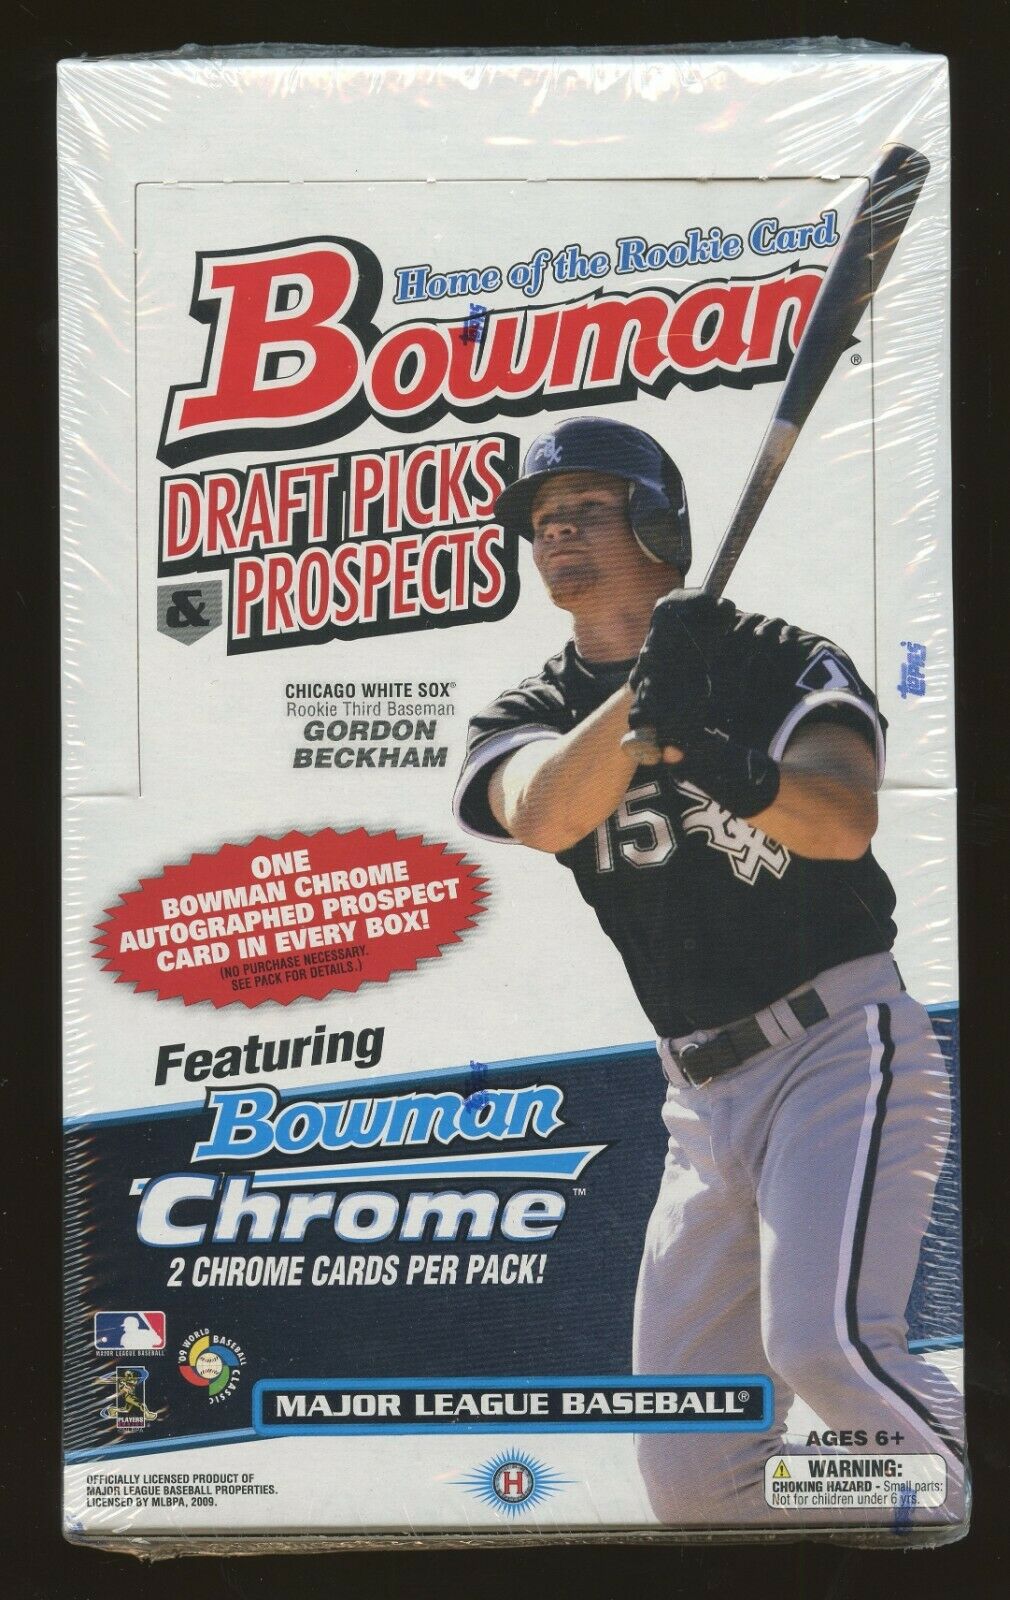 2009 Bowman Chrome Draft Picks Prospects Factory Sealed Box MIKE TROUT RC Yr